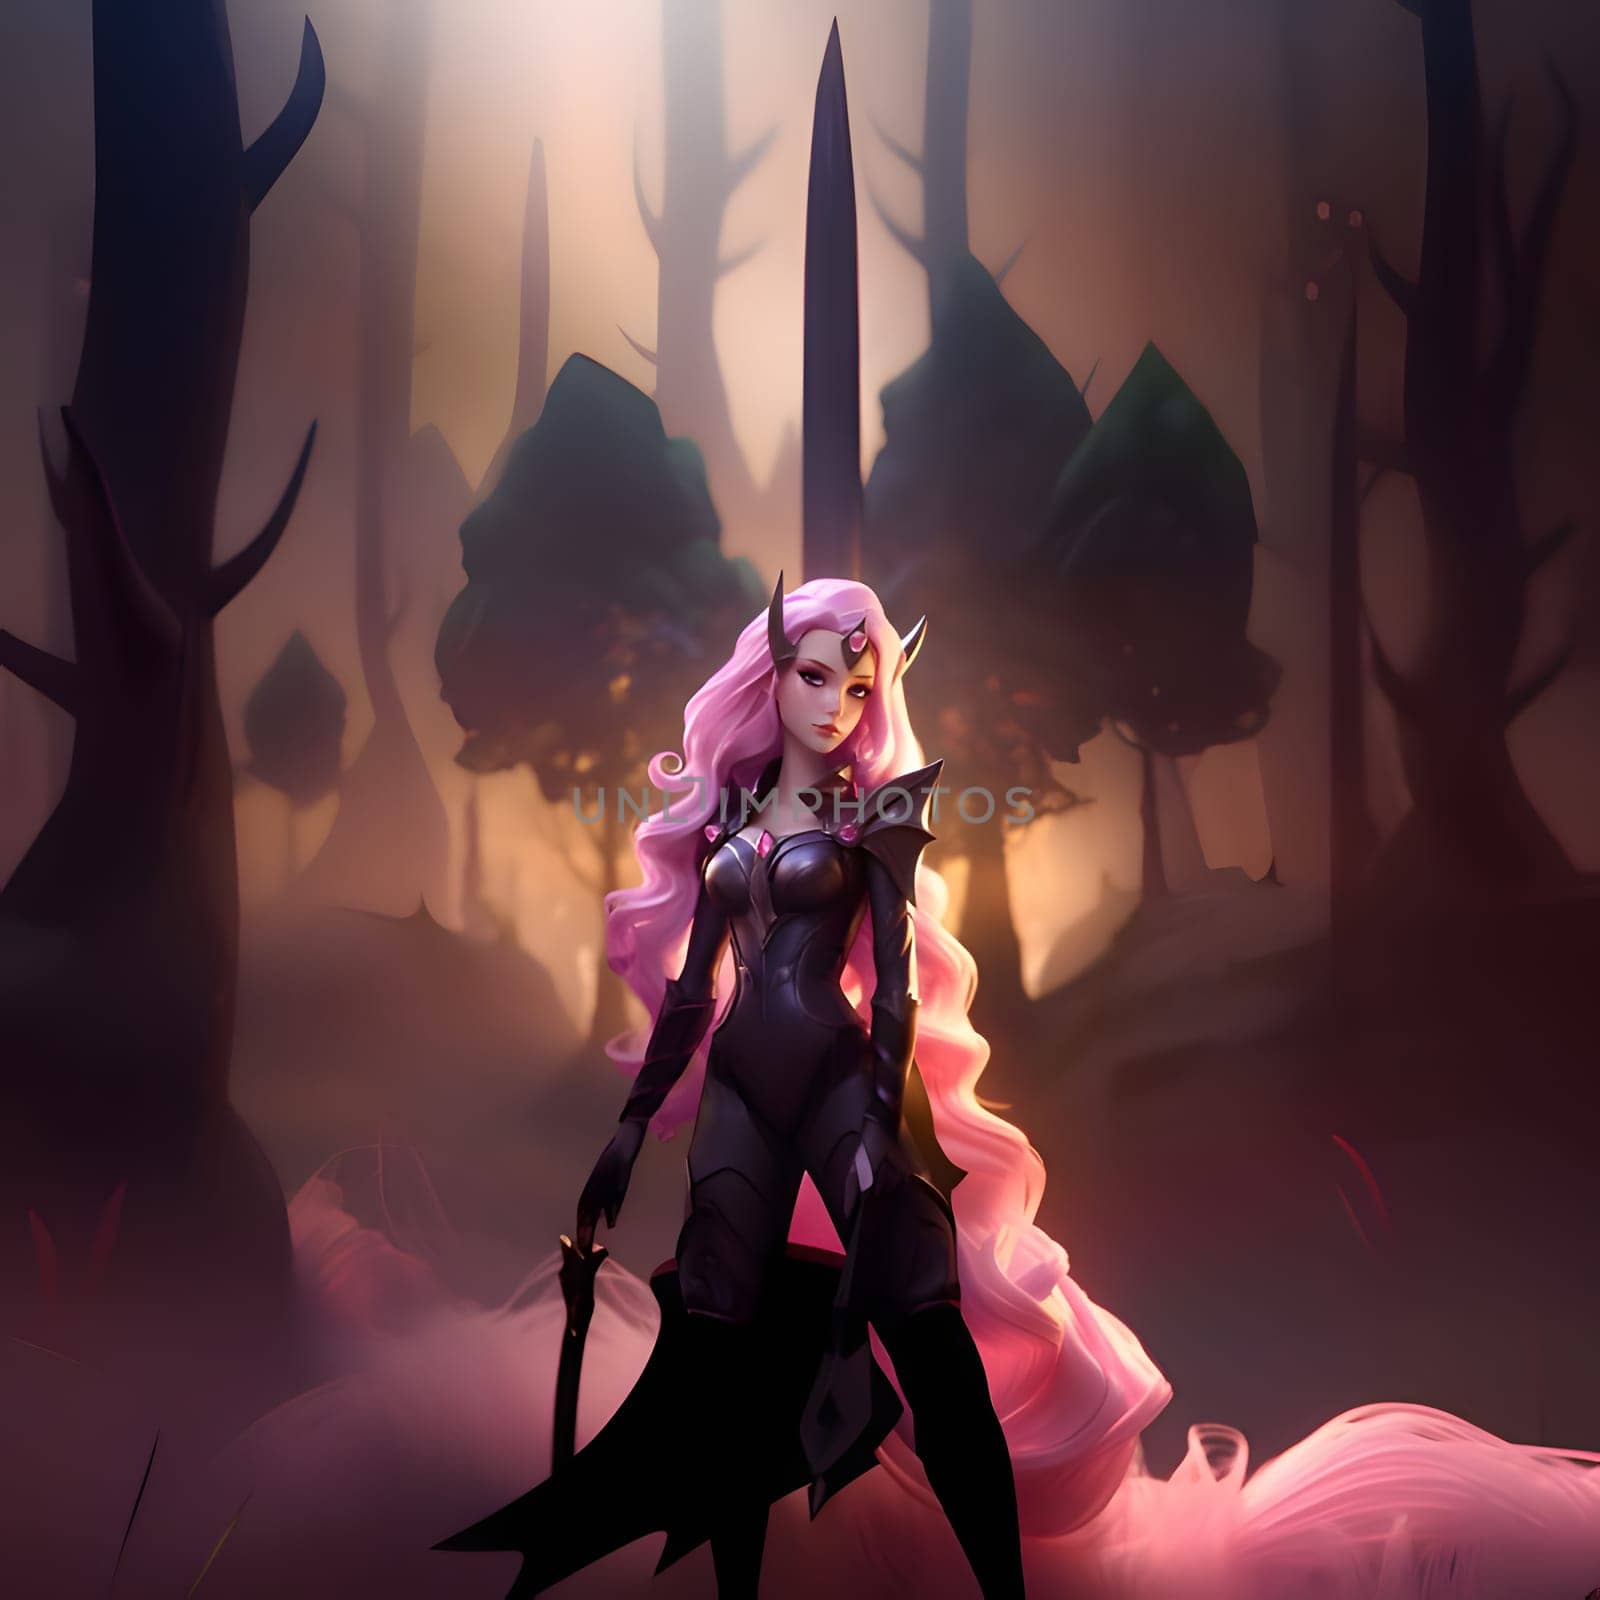 An illustration of a game character, a girl with long pink hair and a black outfit, holding a magical wand in her hand, ready for adventures.